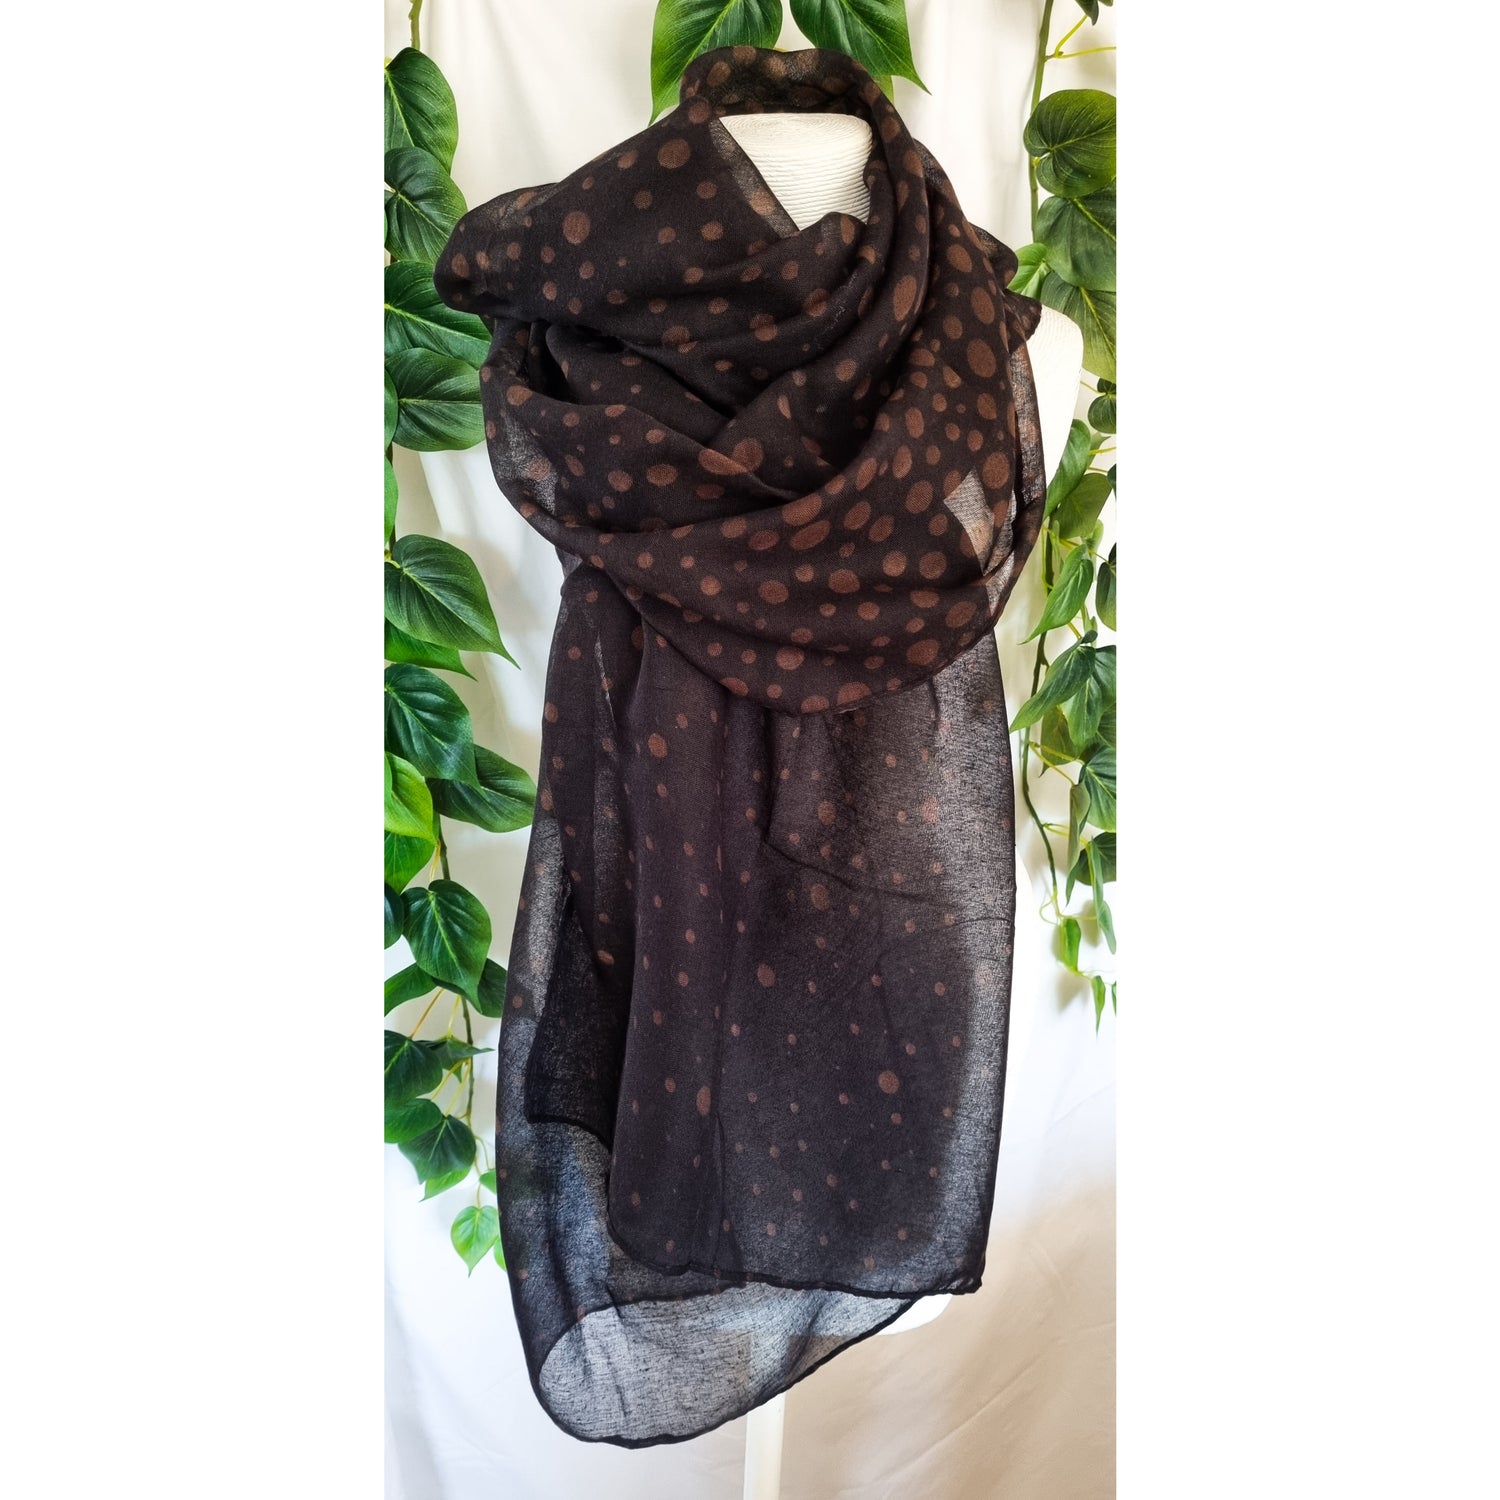 Viscose Scarf - Black and Chocolate Spots